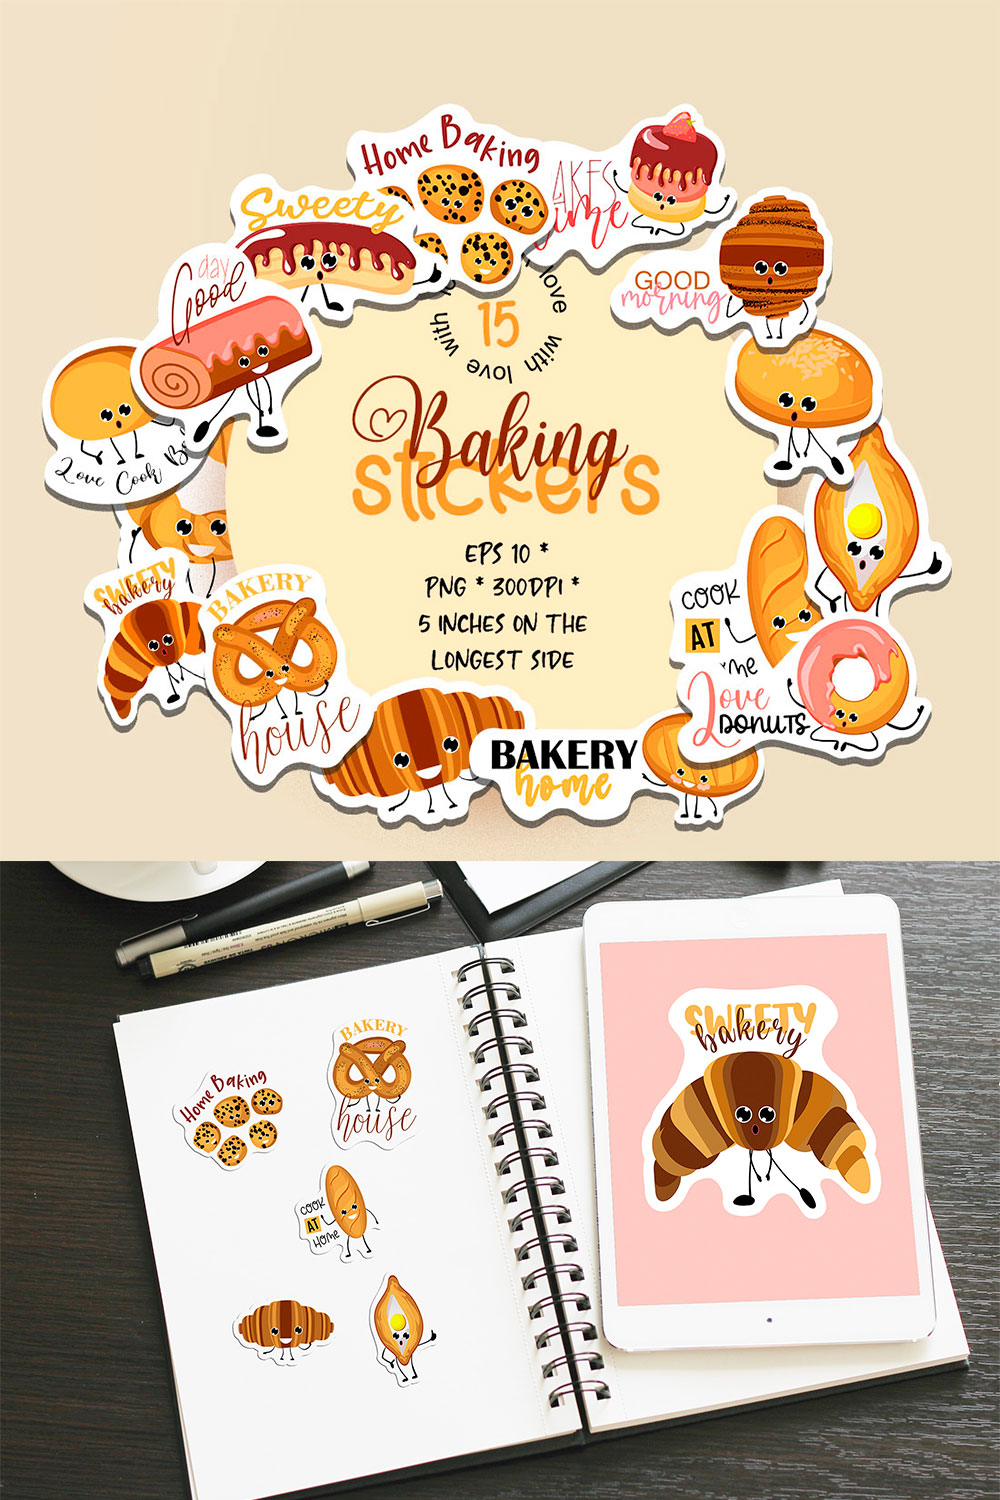 Set of stickers with pastries and bakery | 15 baking sticker designs pinterest preview image.